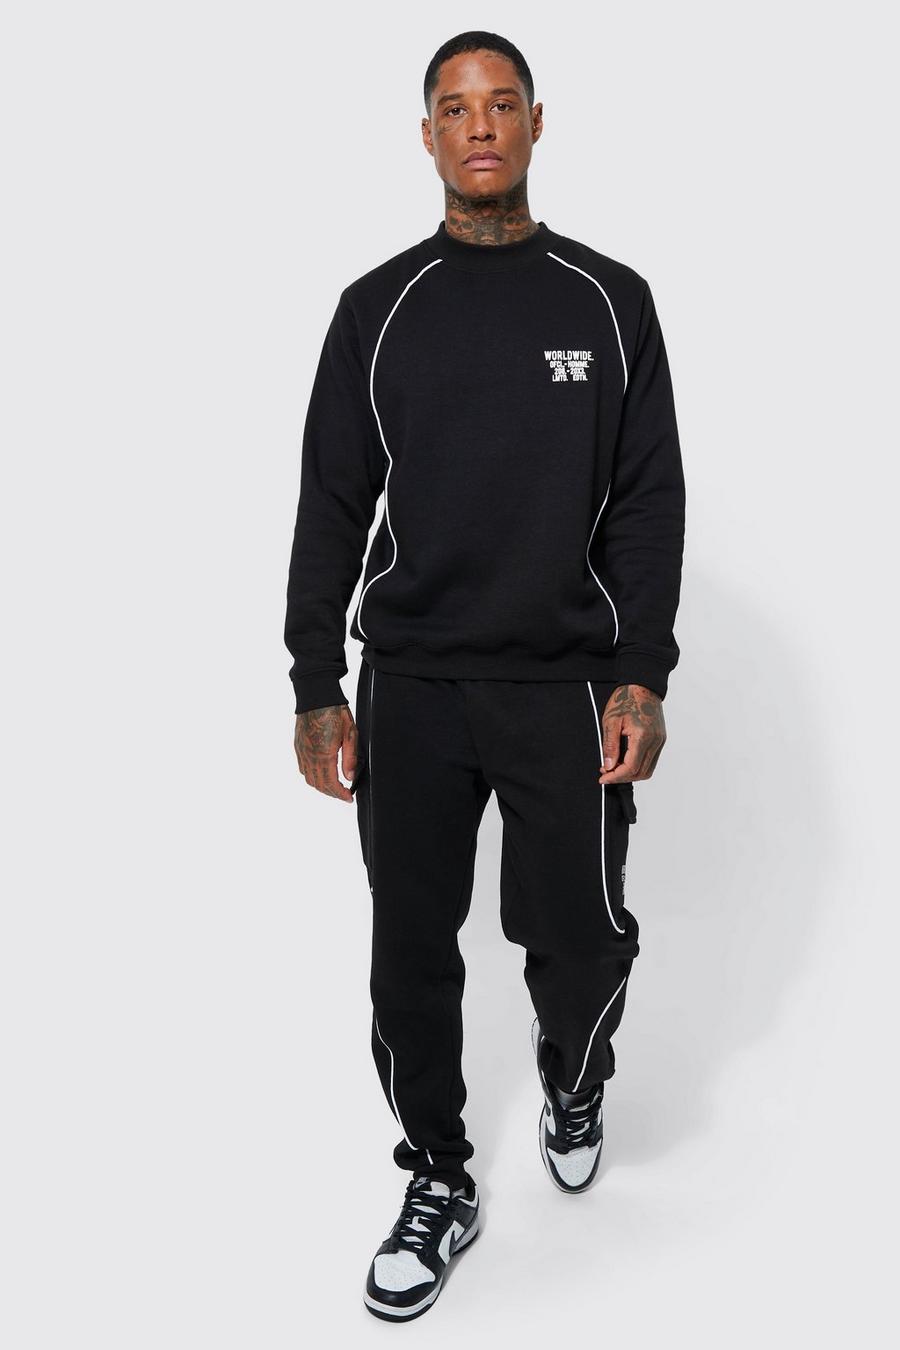 Black Extended Neck Piping Sweatshirt Tracksuit